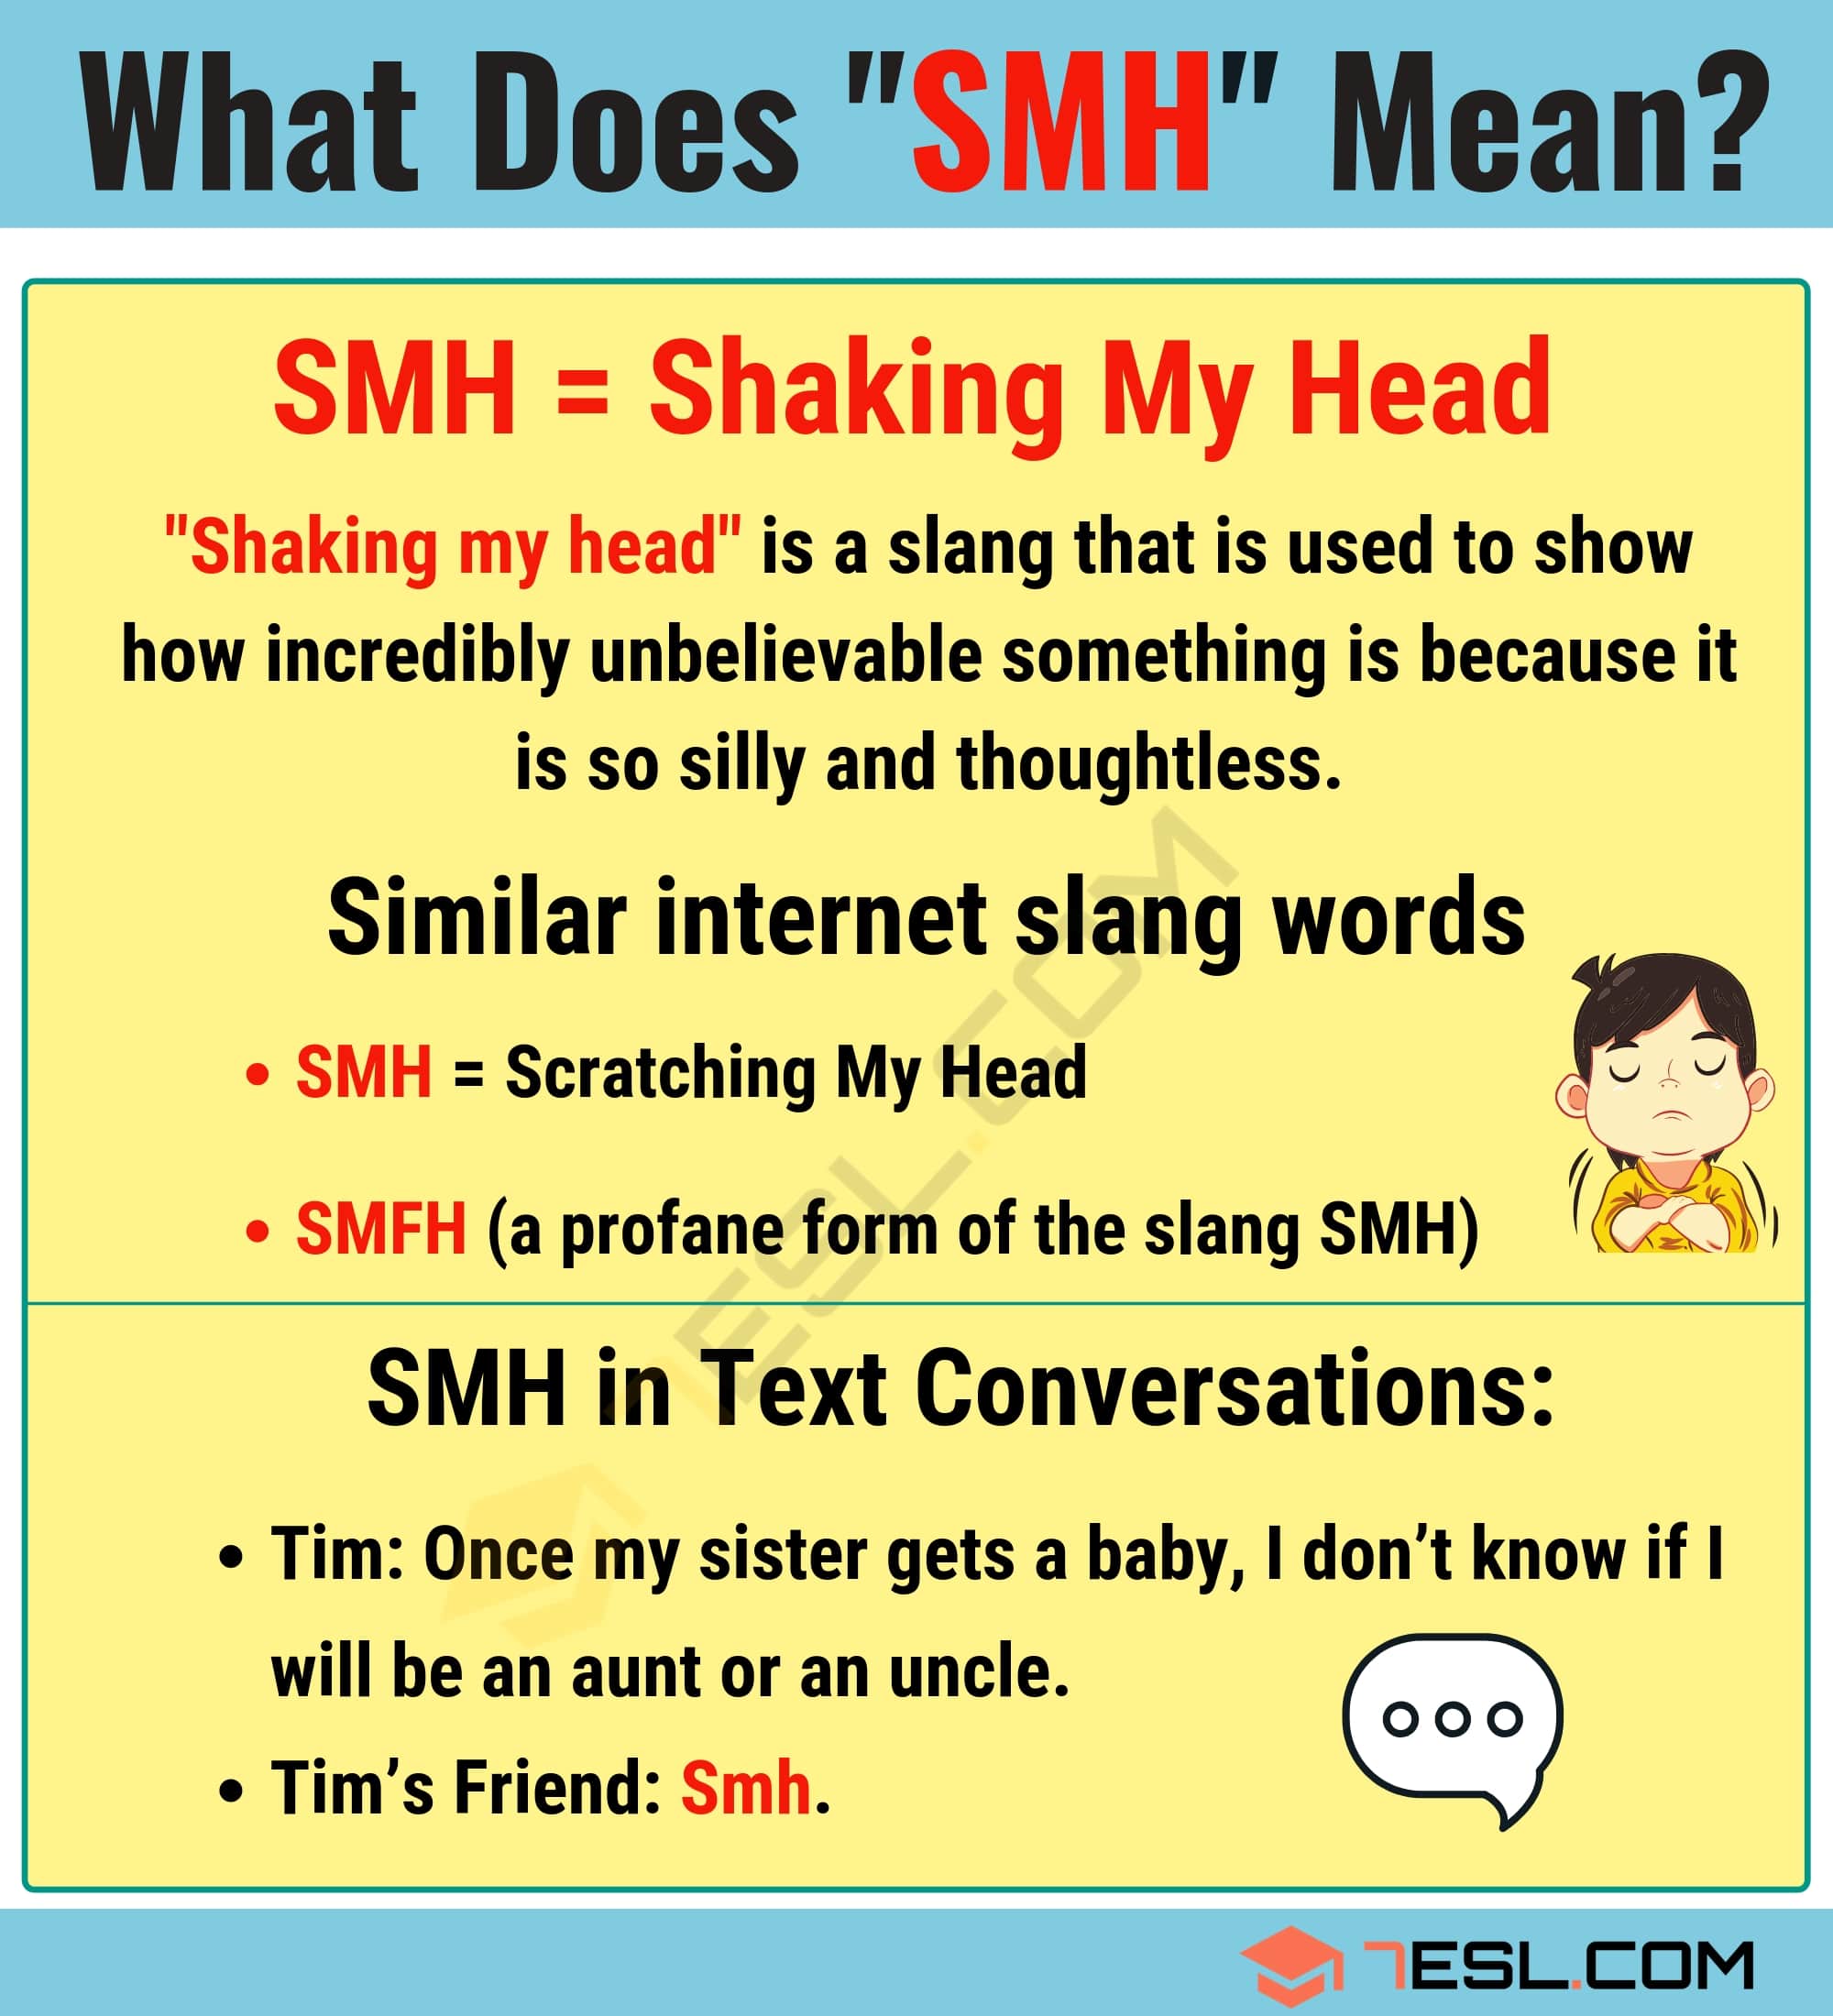 derek bross recommends smfh what does it mean pic